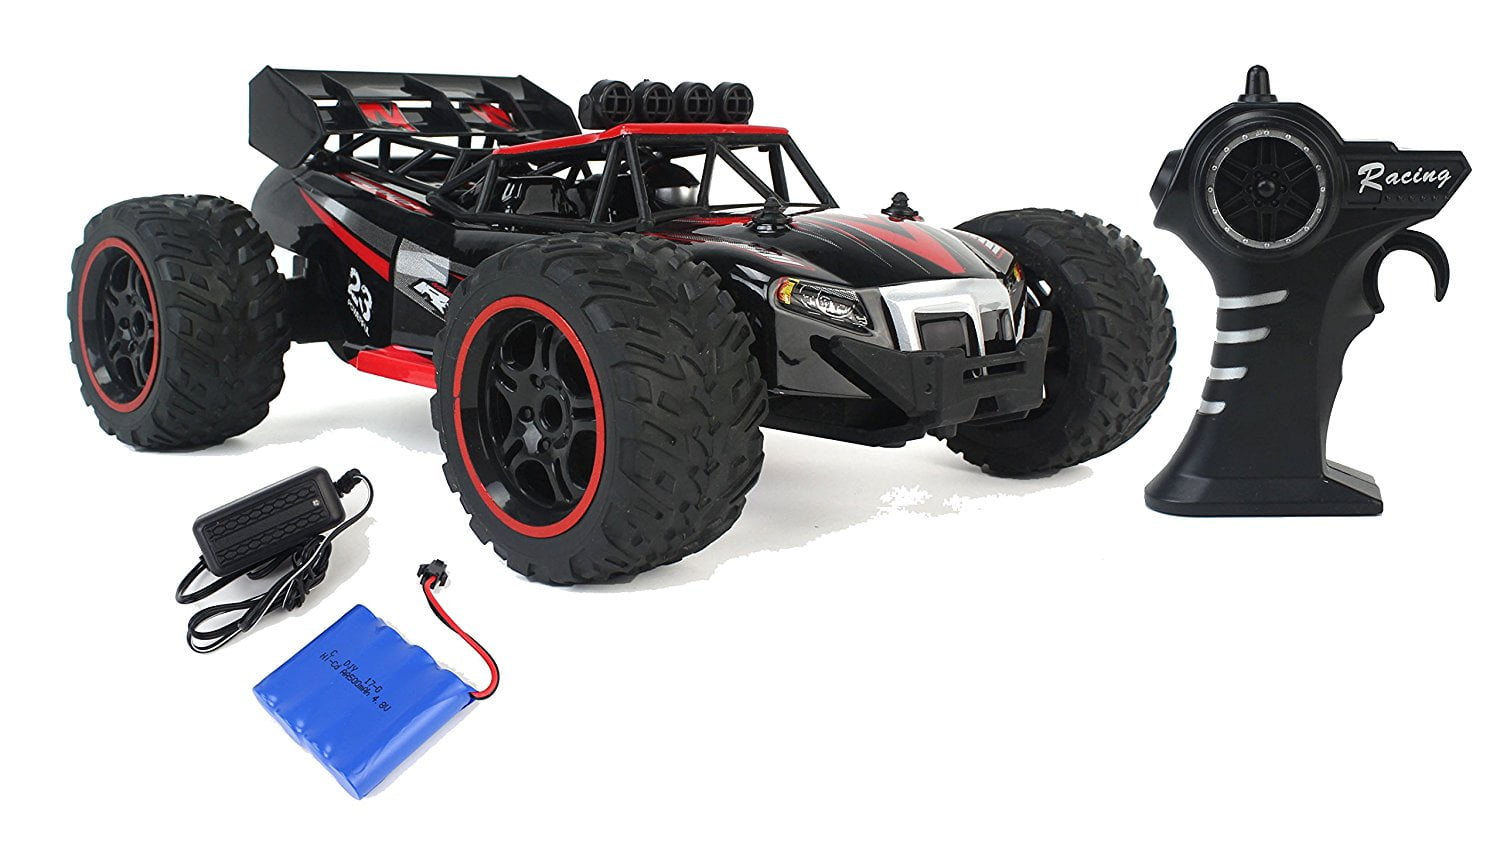 top speed ghost rc car